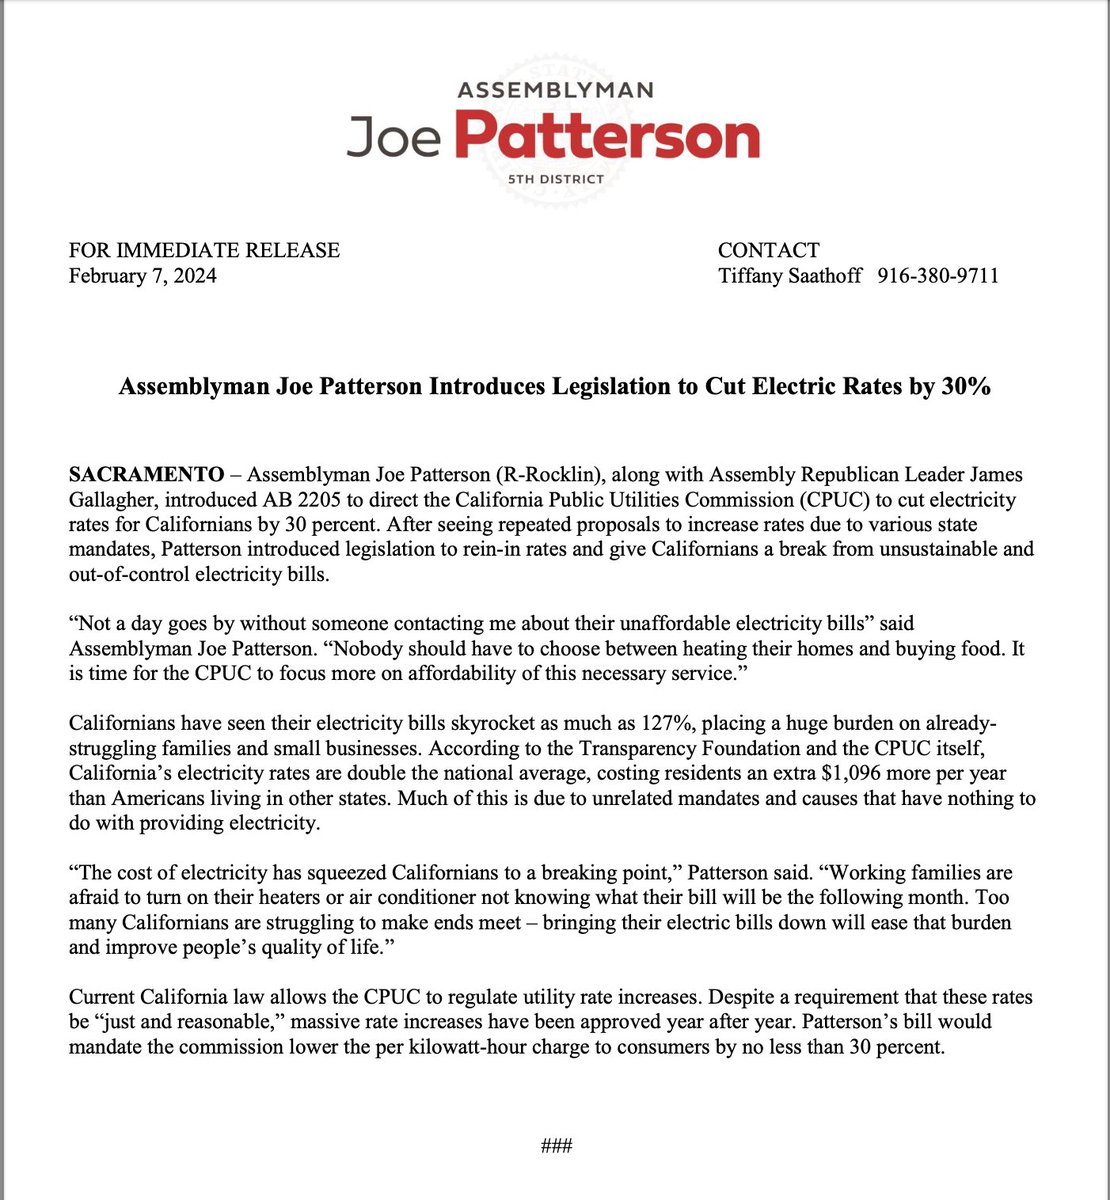 Today I introduced AB 2205 which directs the PUC to reduce electricity prices by 30%. Electric prices in California are unaffordable. People should not have to decide between putting food on the table and paying their utility bills.